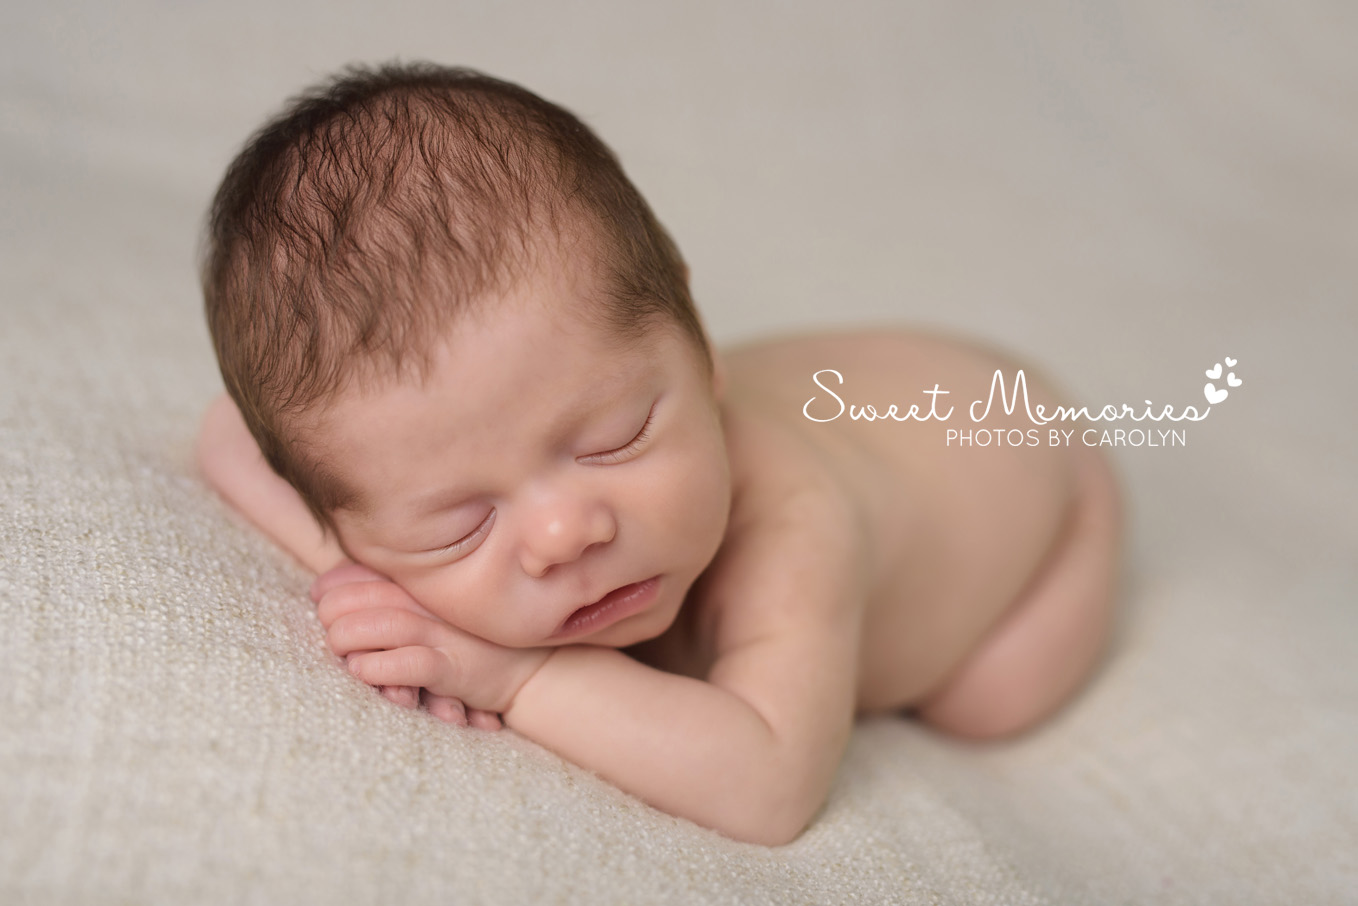 Sweet Memories Photos by Carolyn | Plymouth Meeting PA | Bucks County Montgomery County Newborn Infant Baby Photographer | newborn baby boy sleeping with head on hands